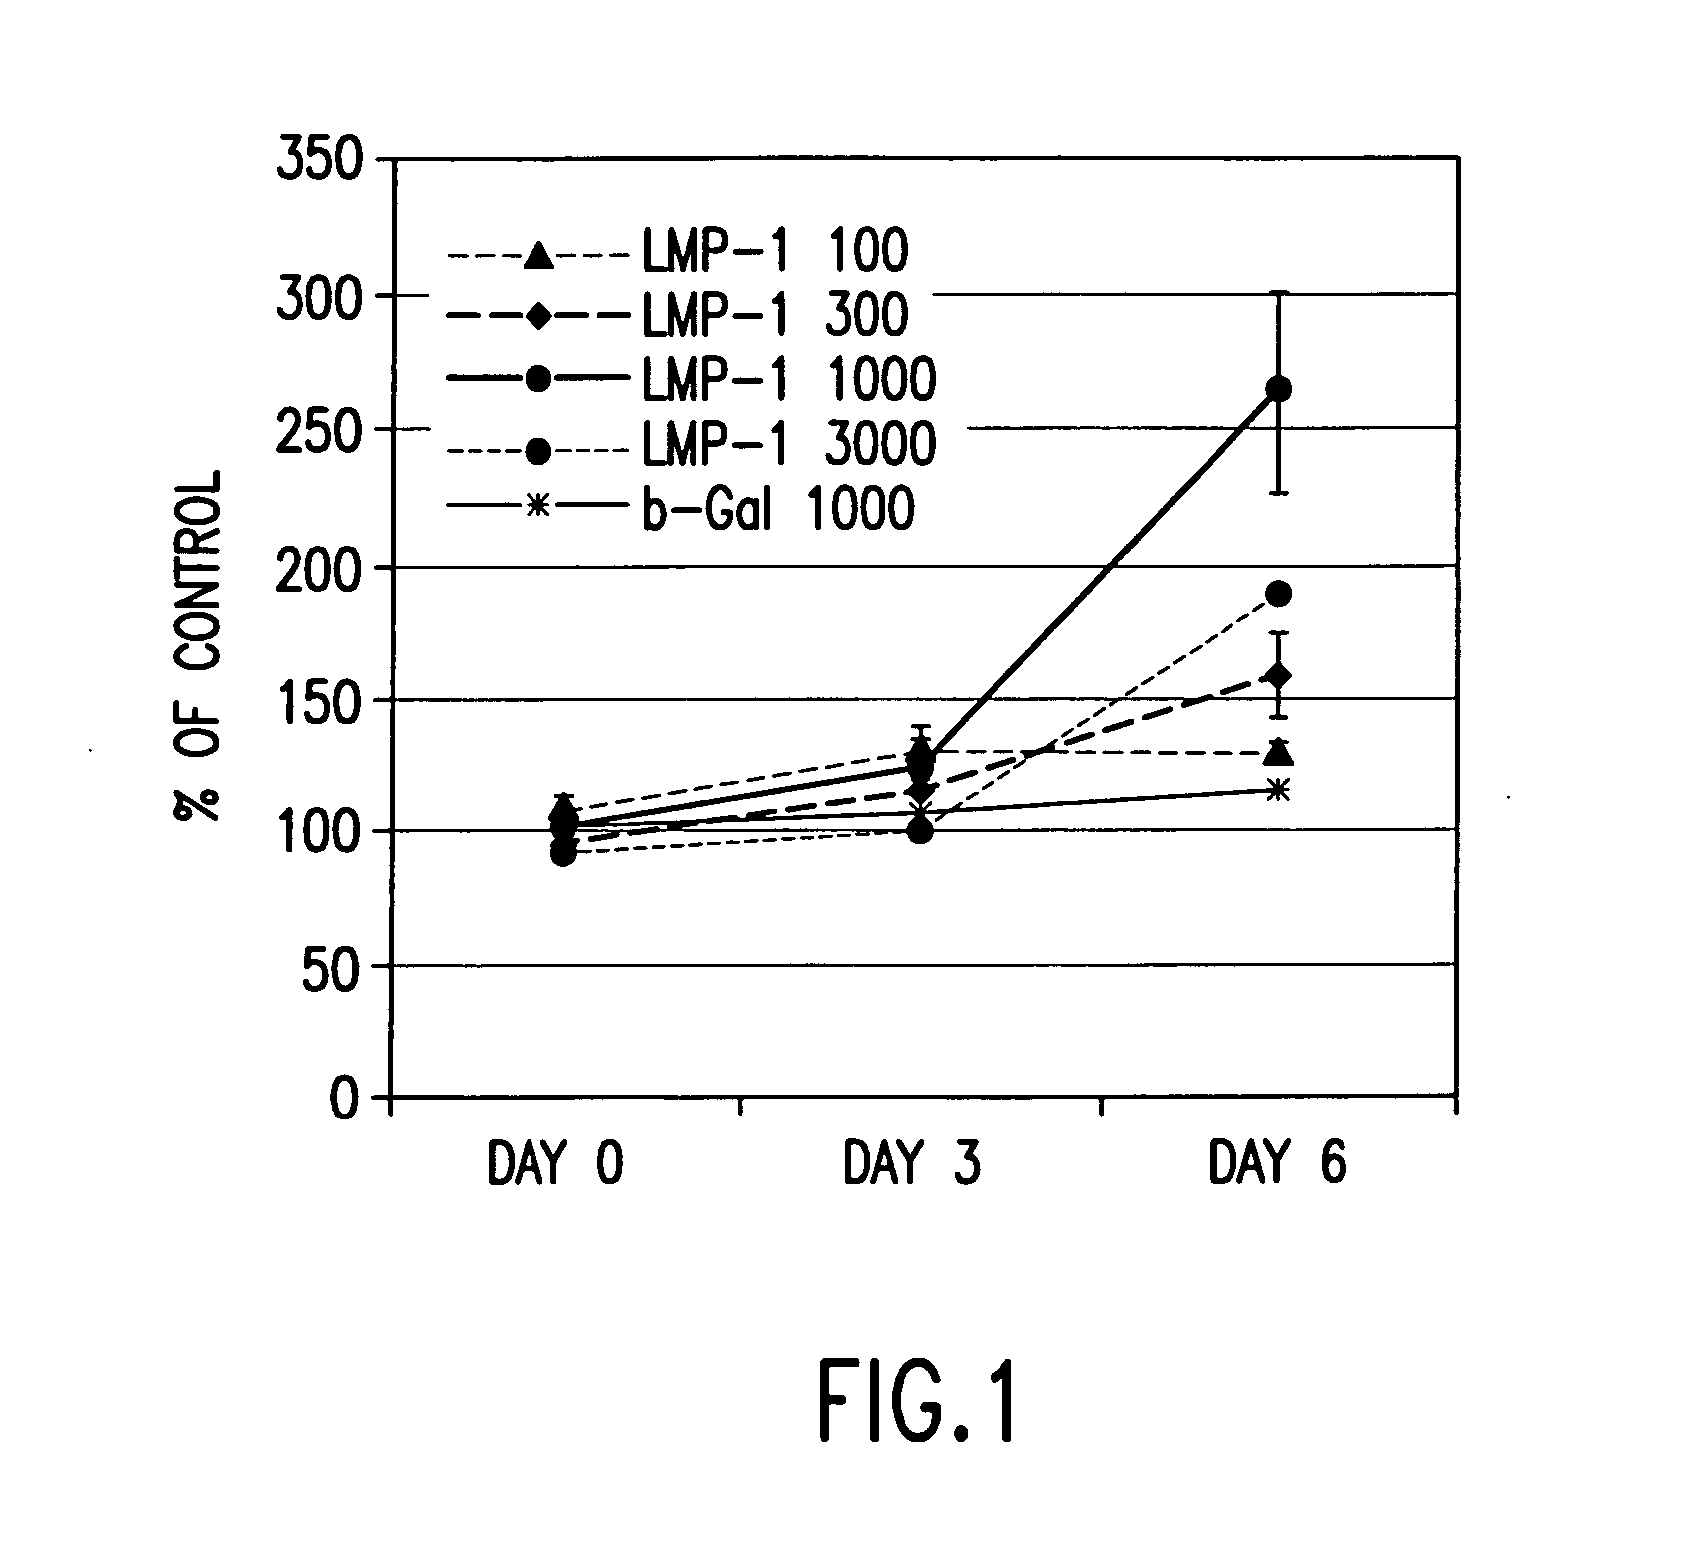 Methods of inducing or increasing the expression of proteoglycans such as aggrecan in cells